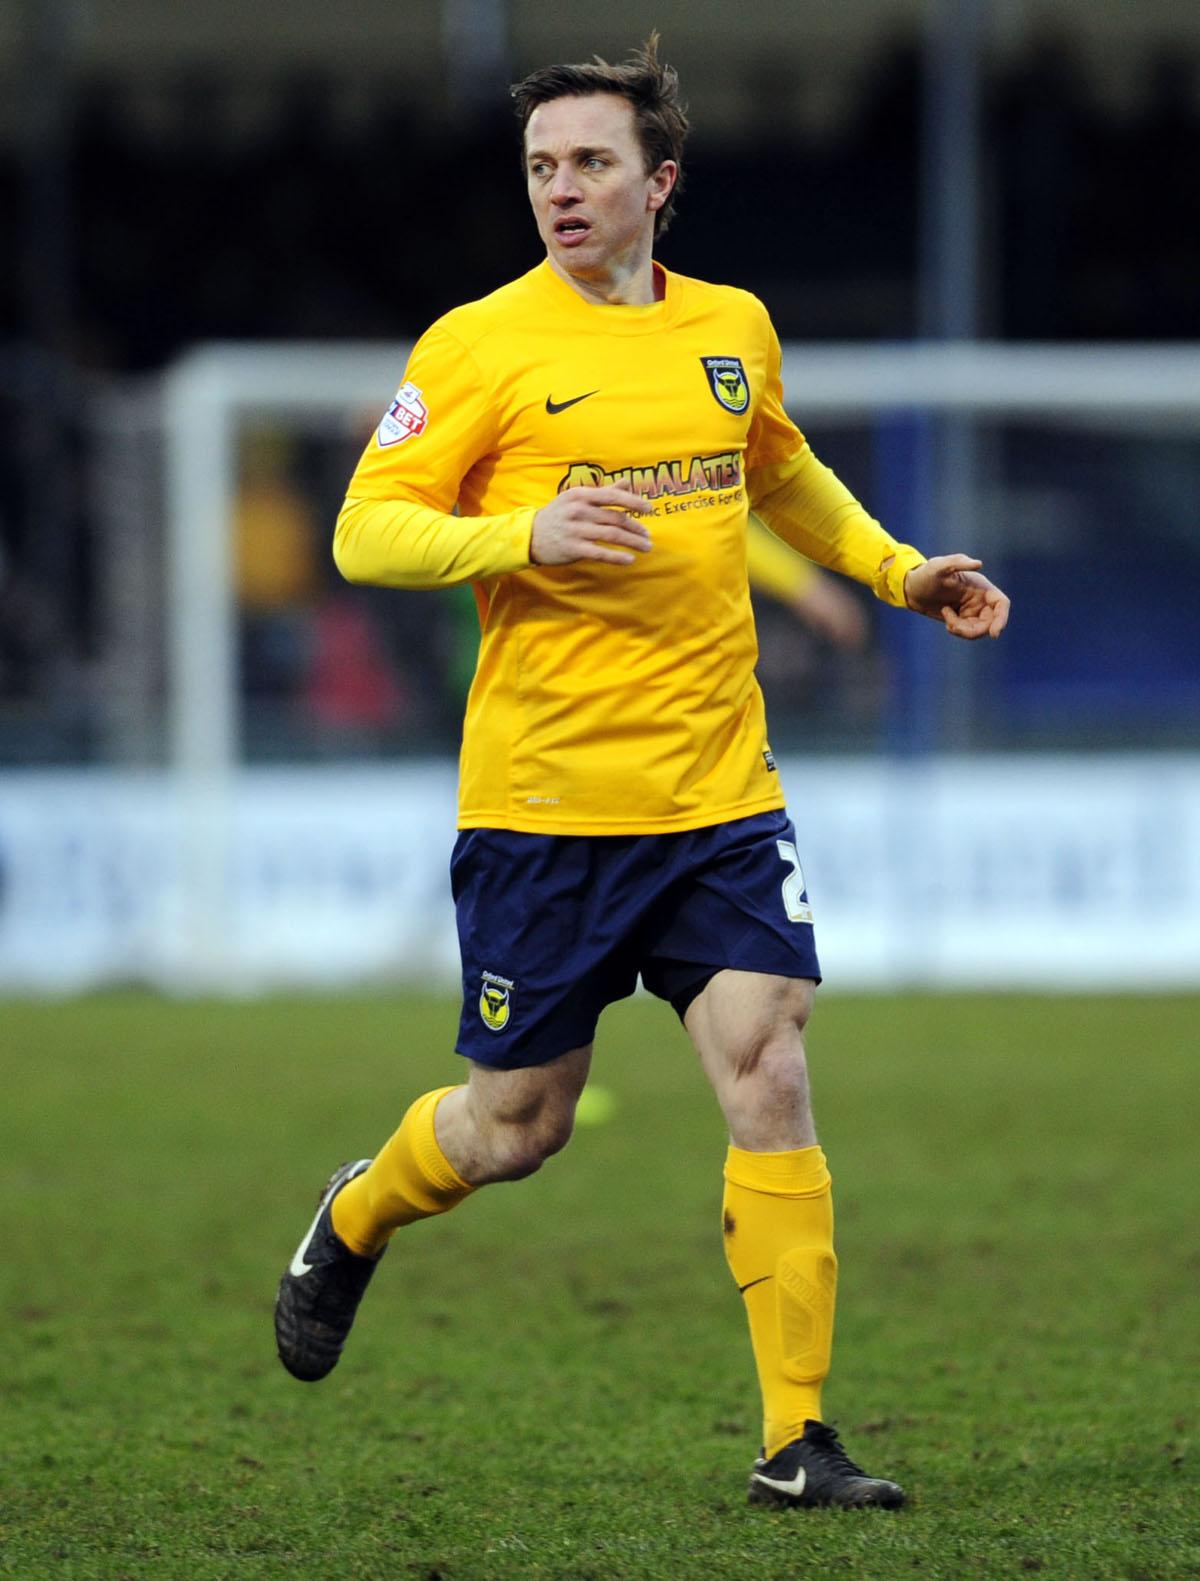 Pictures from Oxford United playing Bristol Rovers away on Saturday 8th February 2014